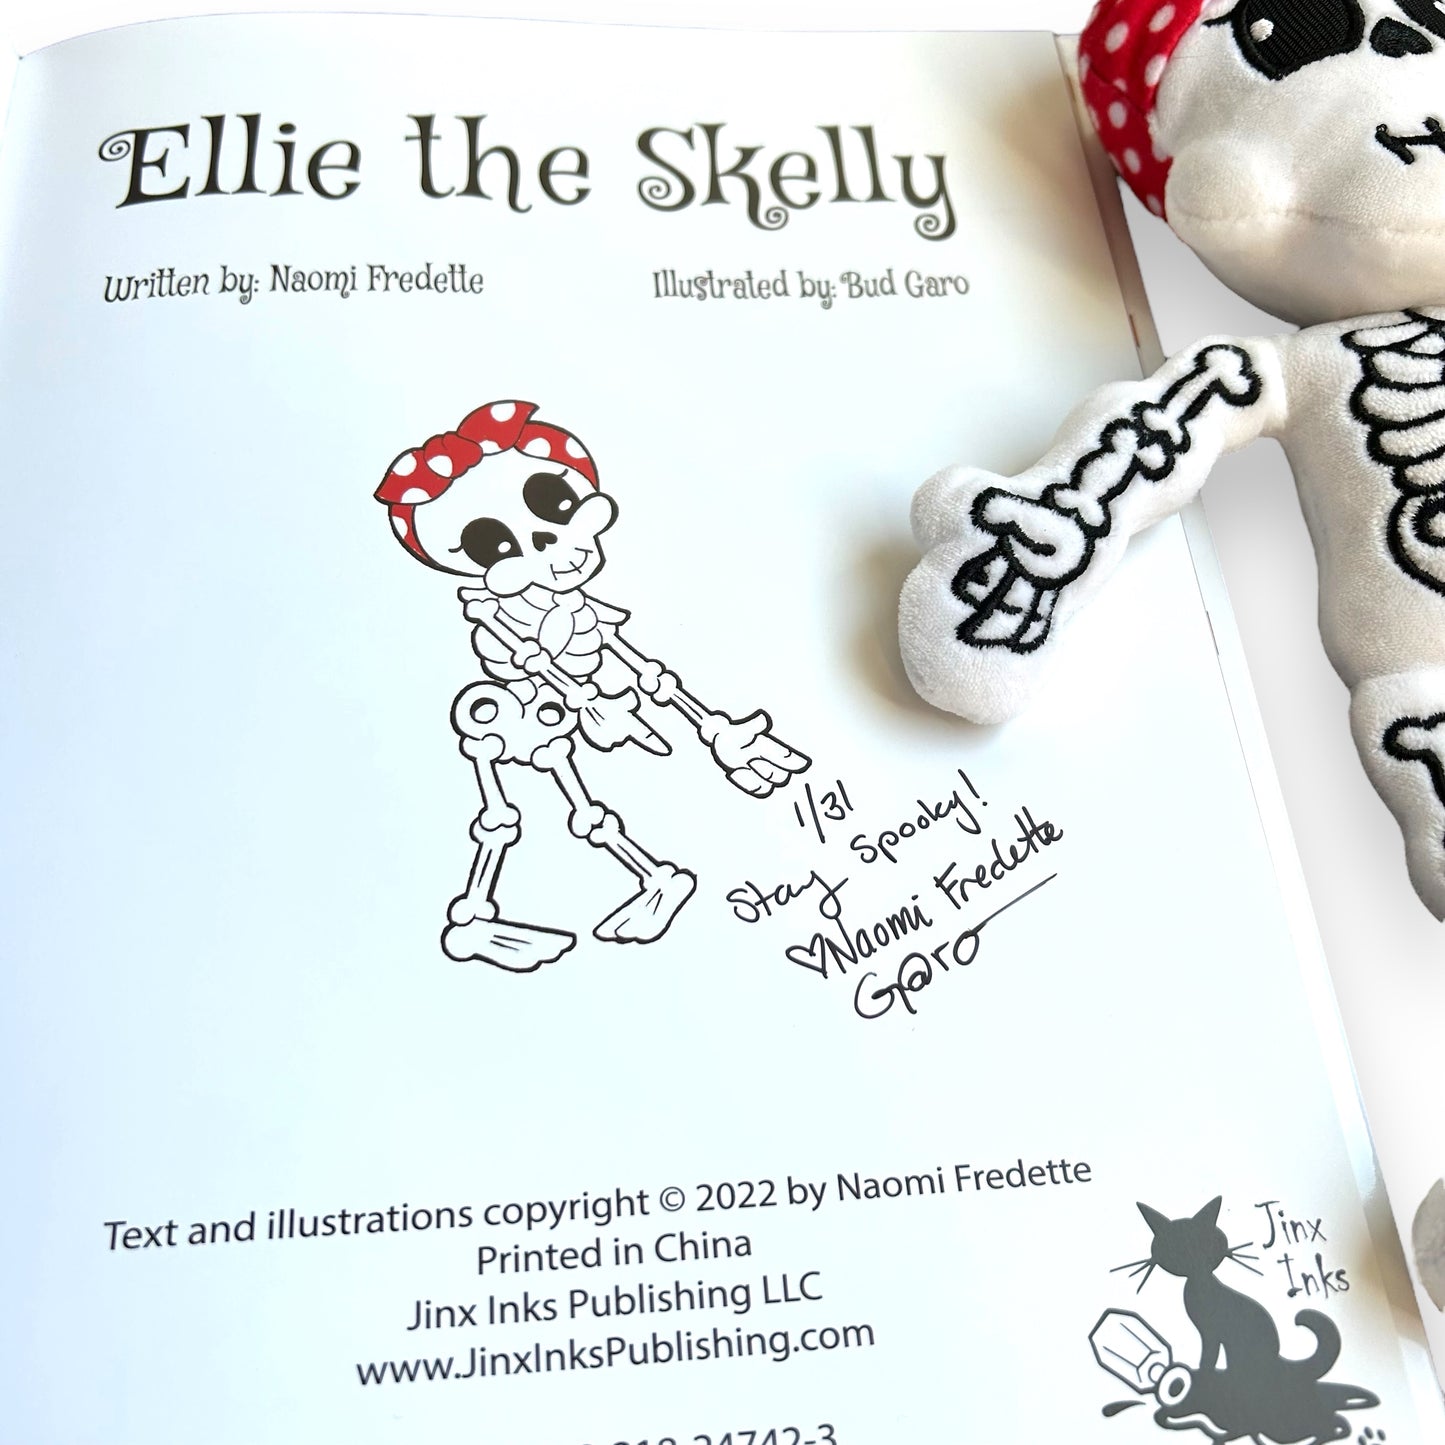 "Spooktacular" Limited First Edition Signed & Numbered Book Bundle